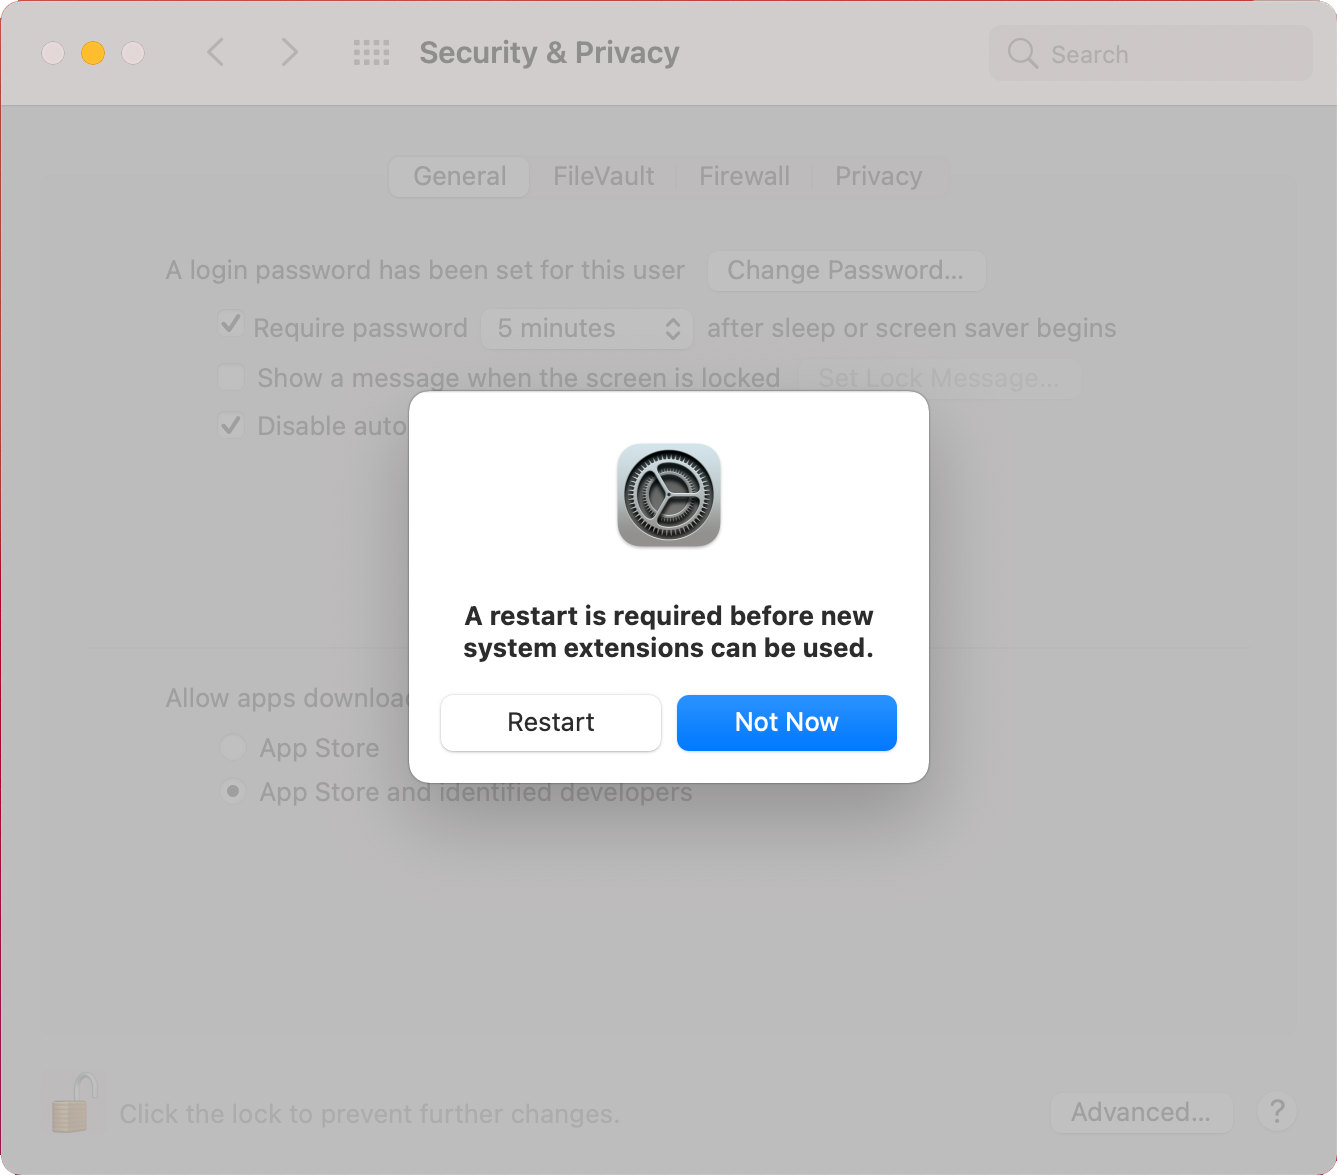 Security_Privacy_Restart.png